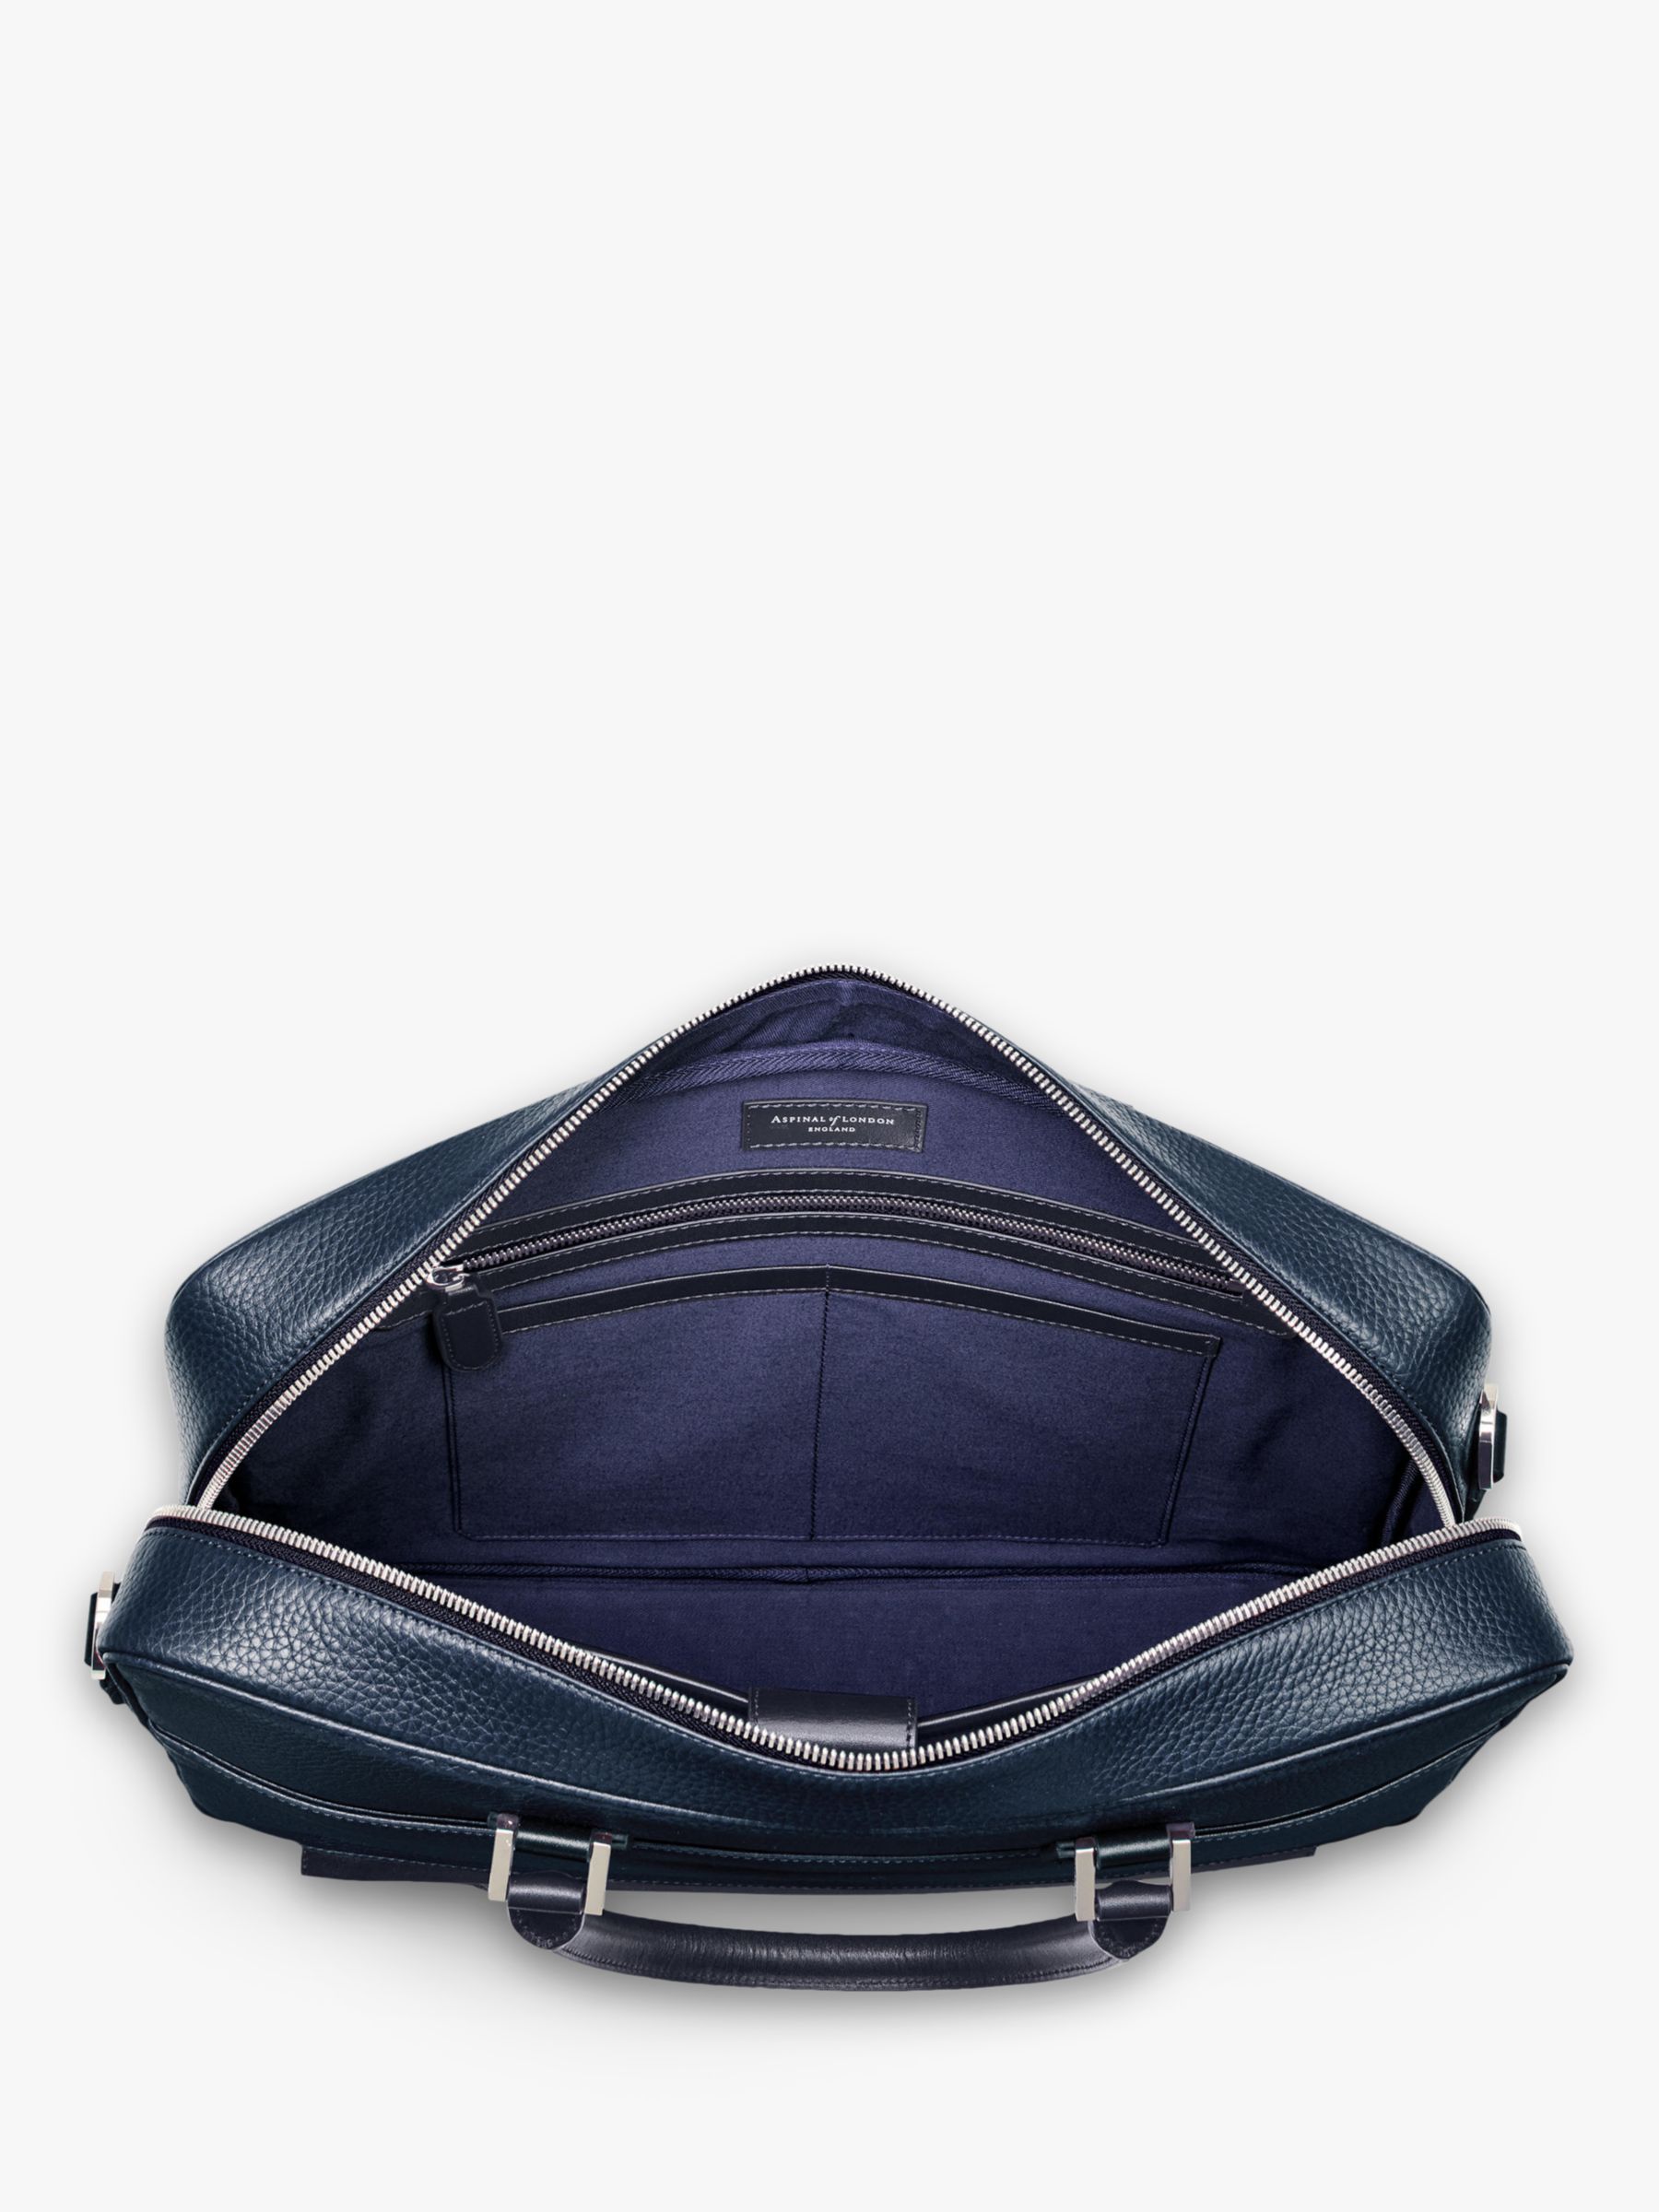 Aspinal of London Mount Street Small Pebble Grain Leather Laptop Bag, Navy